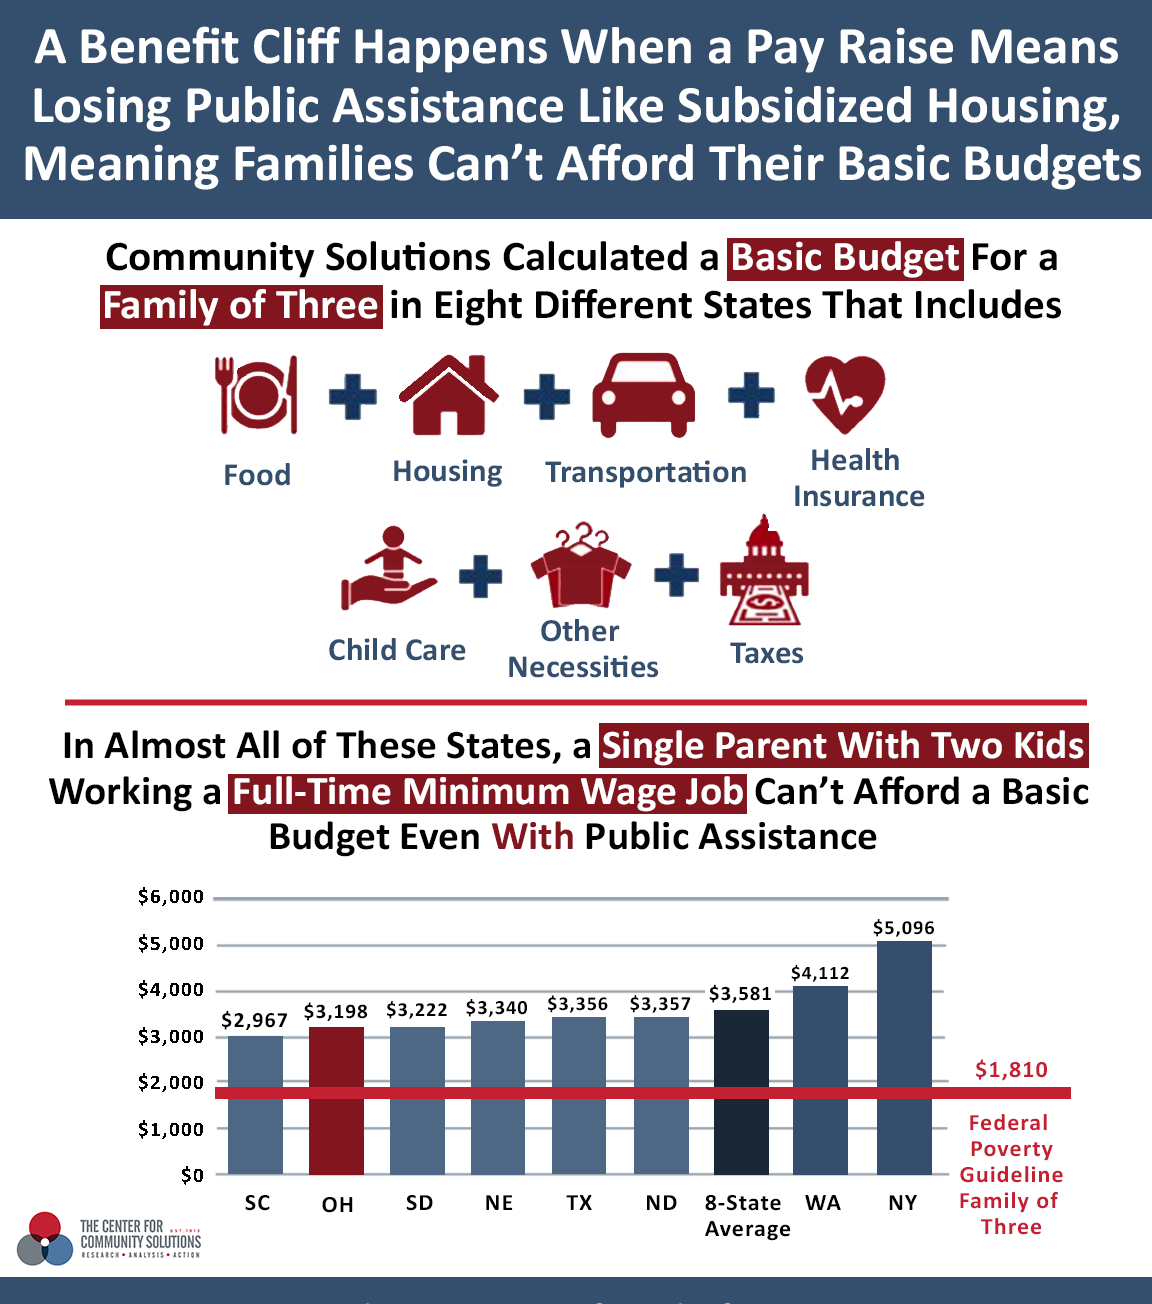 Study shows that a single parent with two kids working a full-time minimum wage job cannot afford a basic budget with public assistance.